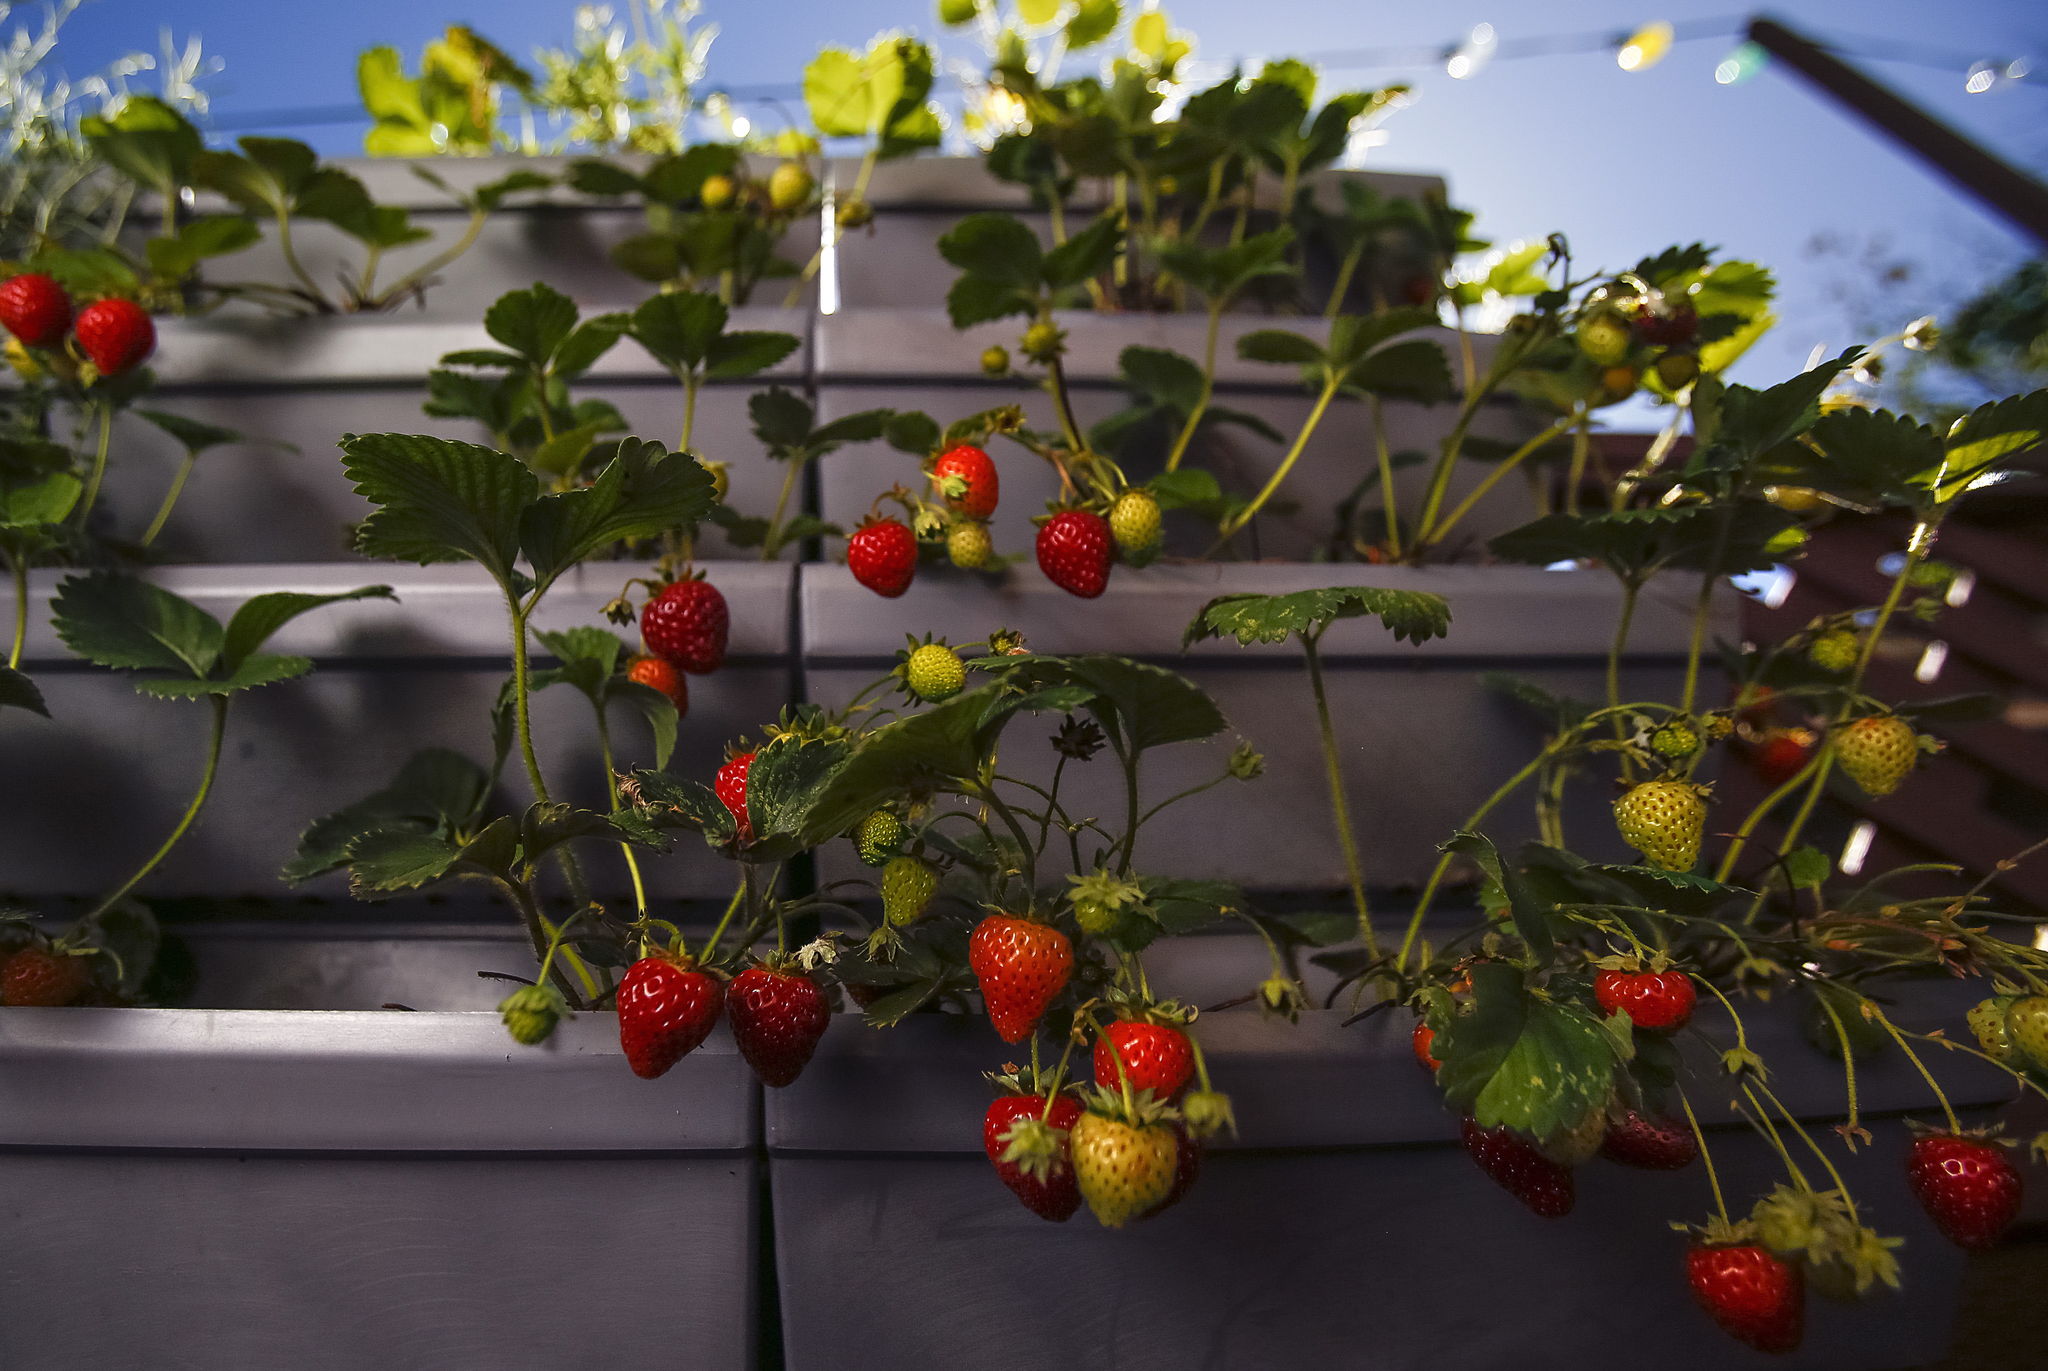 One of several vertical gardens attached to the fence around Matt Keenan and Kristen Boswell’s deck supports strawberries. The vertically arranged pots allow water to gravitate down through the plants, which are well off the ground and quite inviting to the hungry grazer.